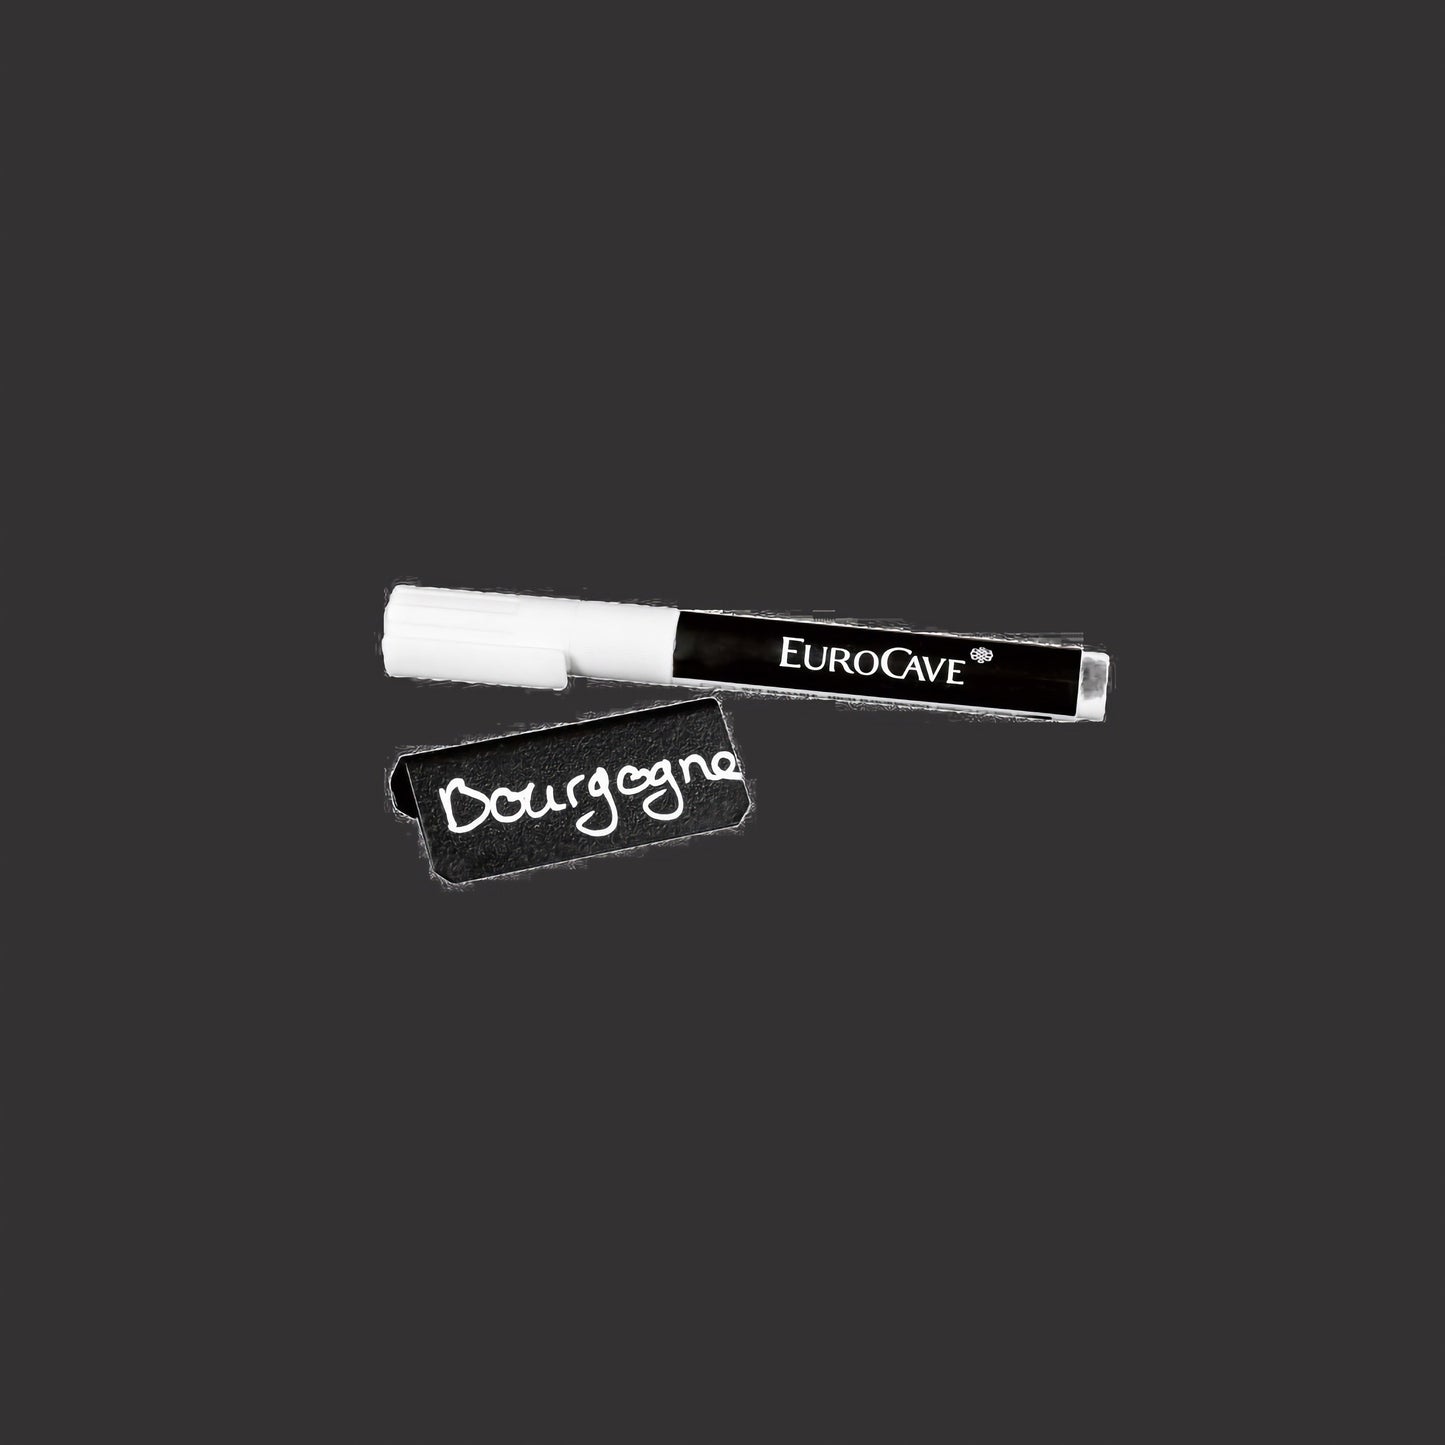 Erasable white marker pen for EuroCave identification systems